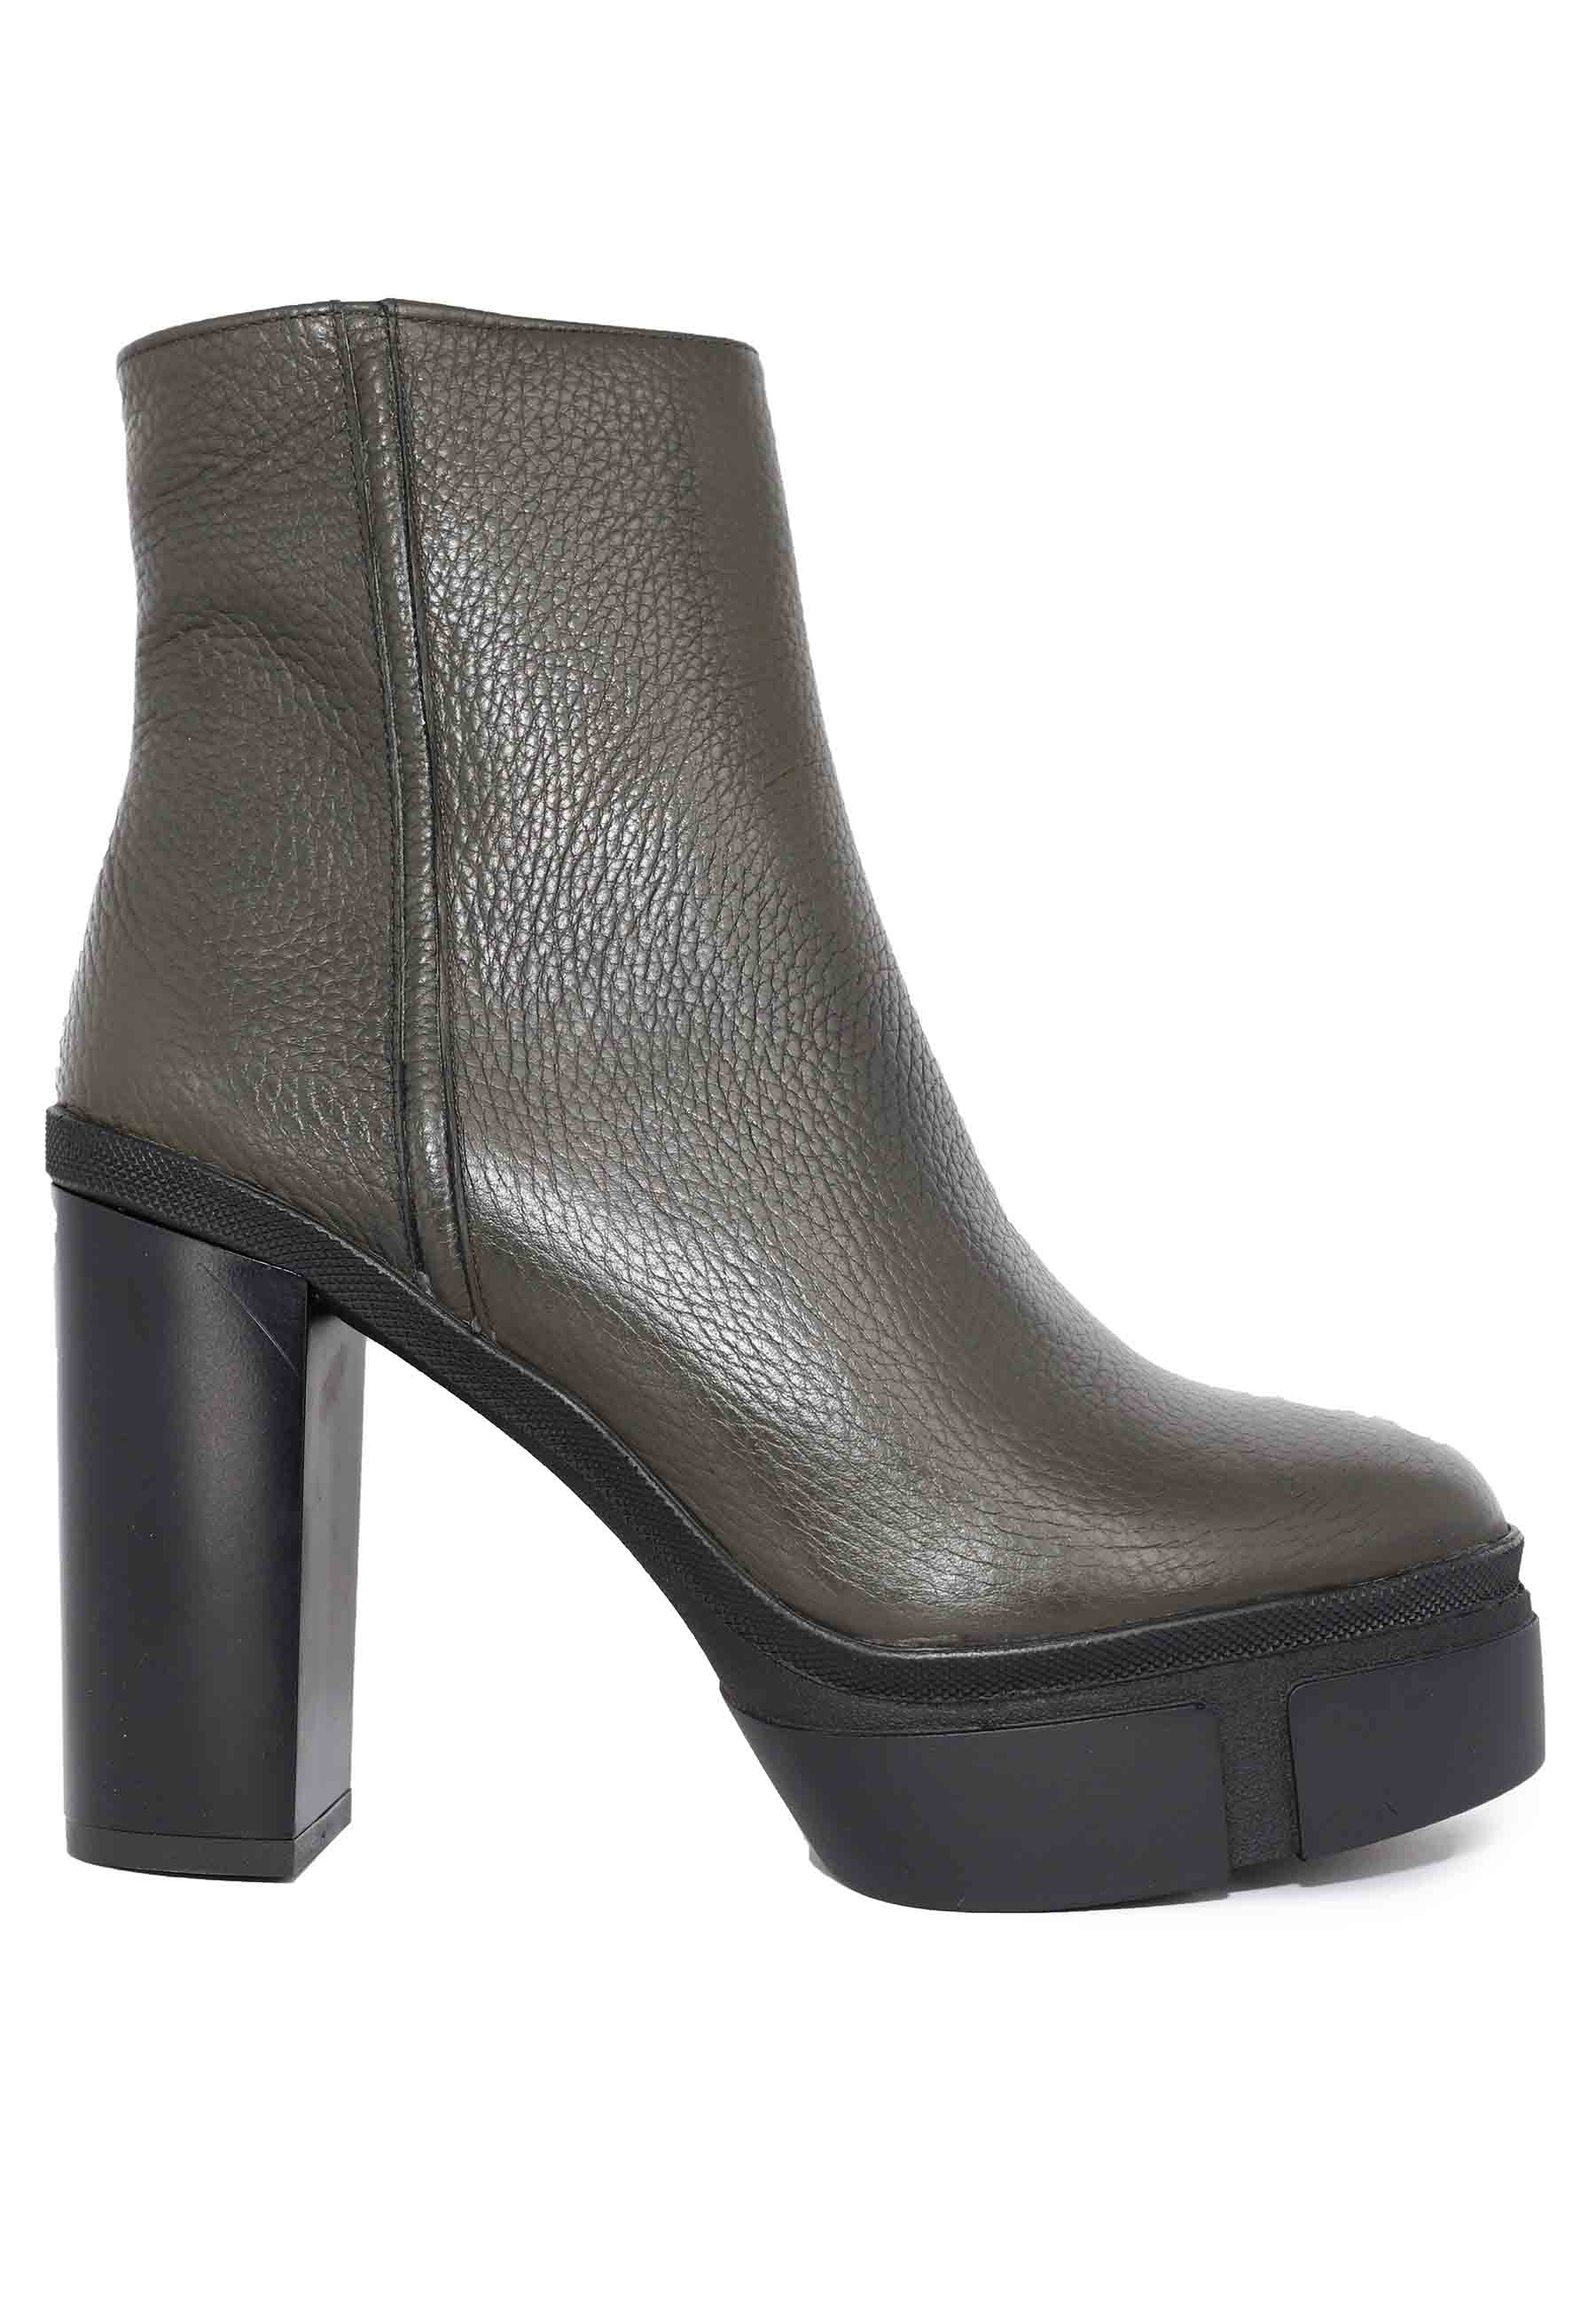 Women's green leather ankle boots with high heel and platform